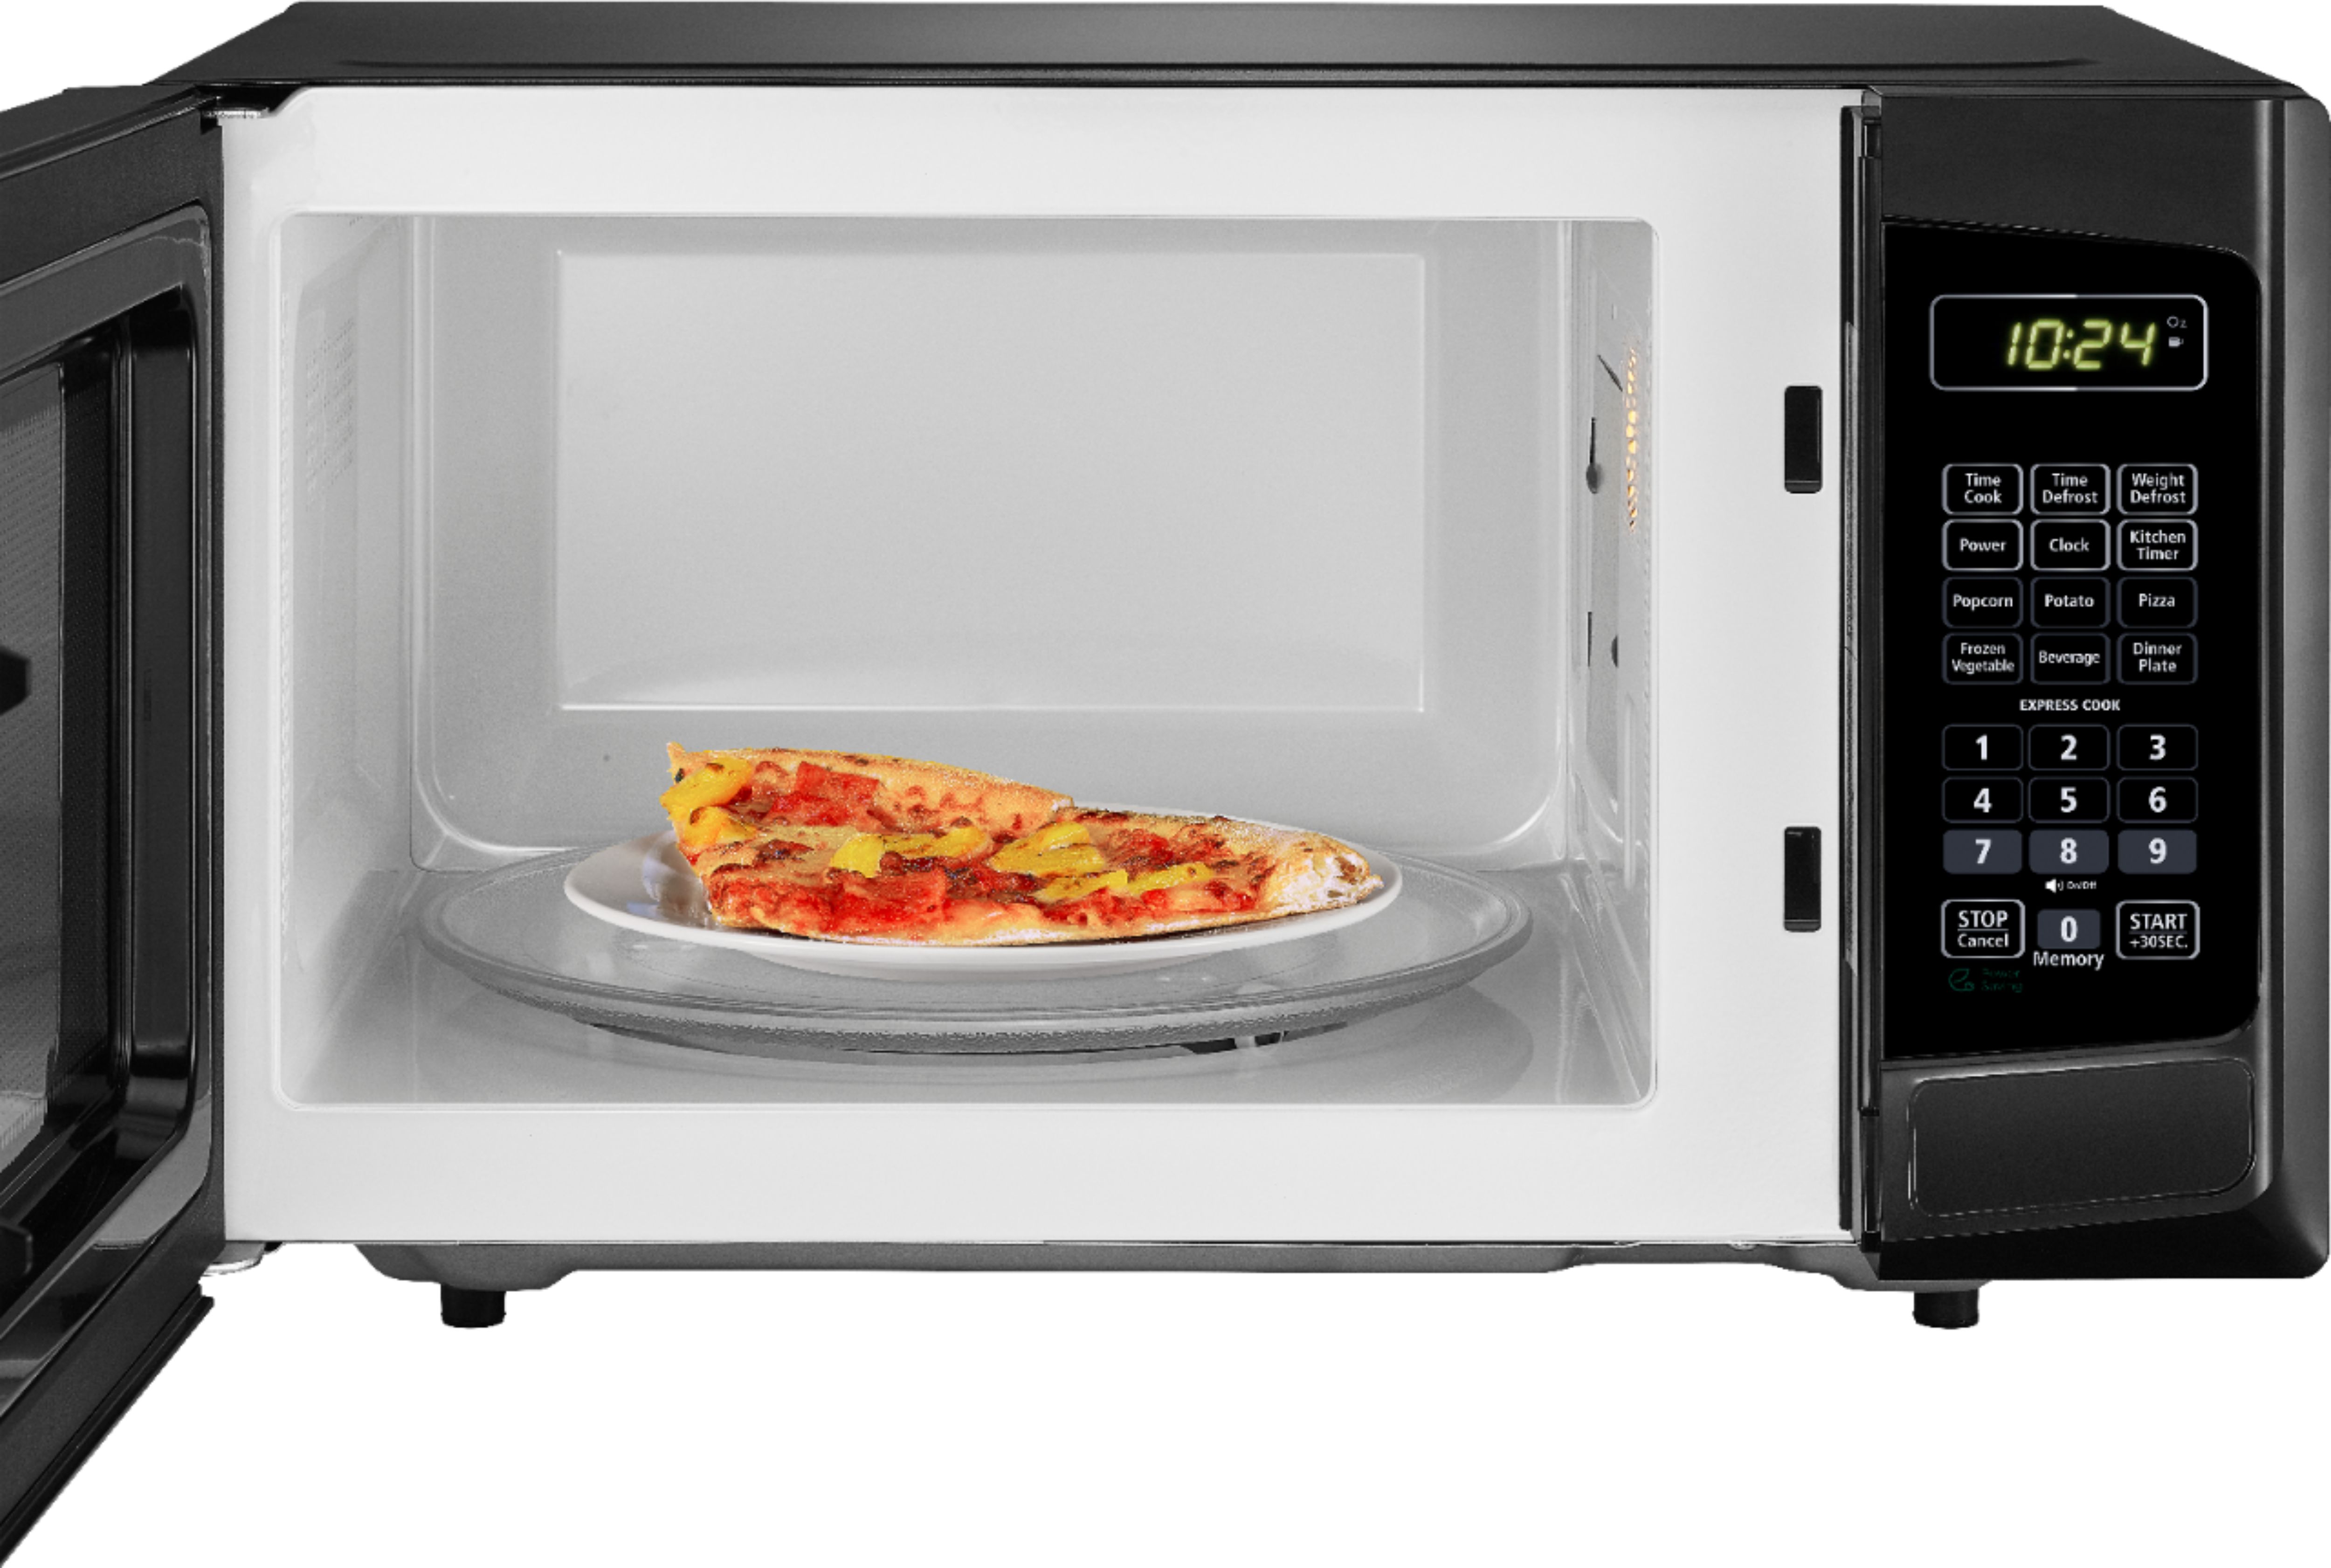 Insignia NS-OTR16SS9 Microwave Oven Review - Consumer Reports